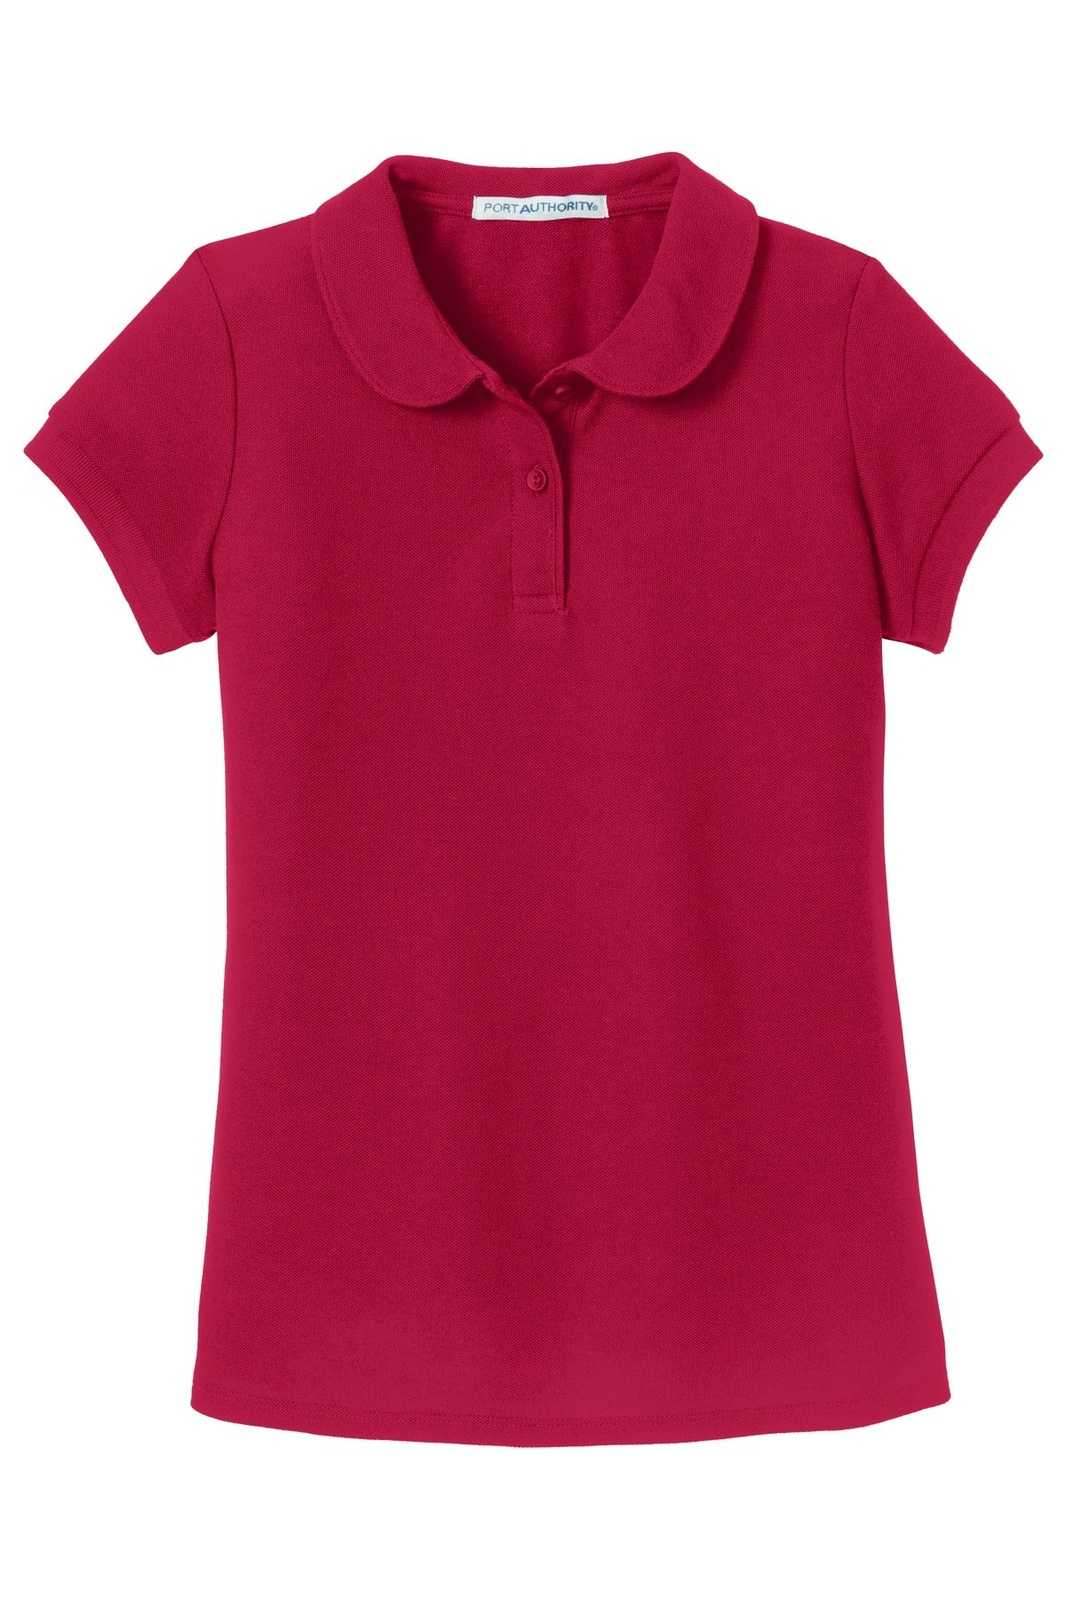 Port Authority YG503 Girls Silk Touch Peter Pan Collar Polo - Red - HIT a Double - 5